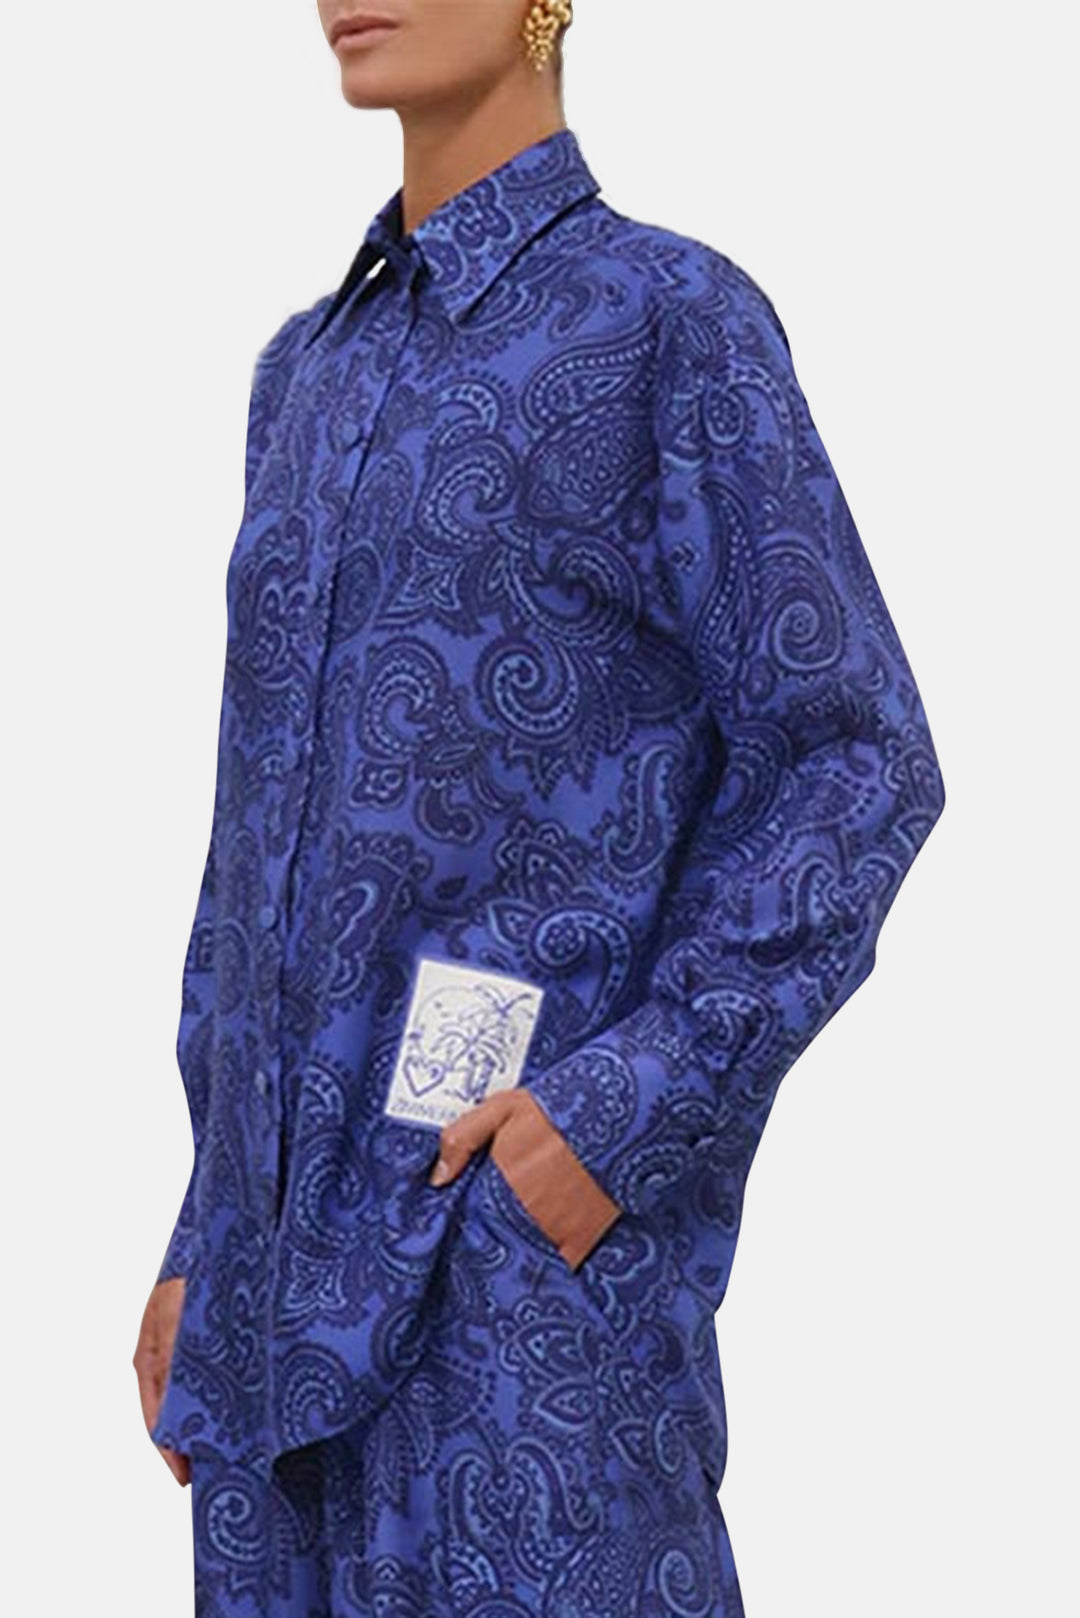 Ottie Relaxed Shirt Blue Paisley